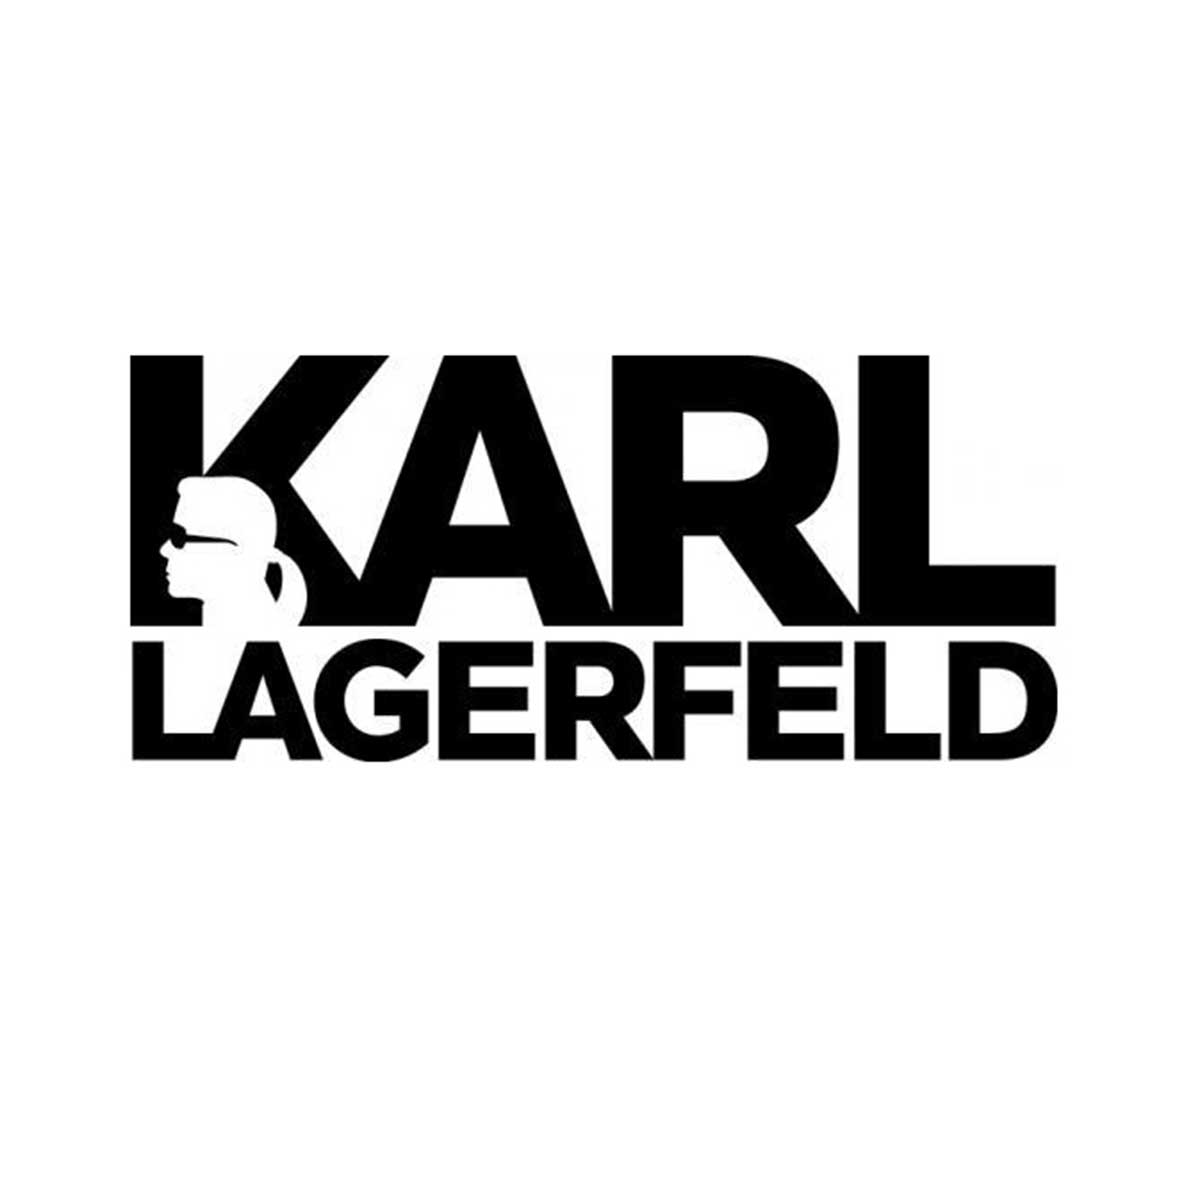 Flash Sale Sign Up - karl lagerfeld